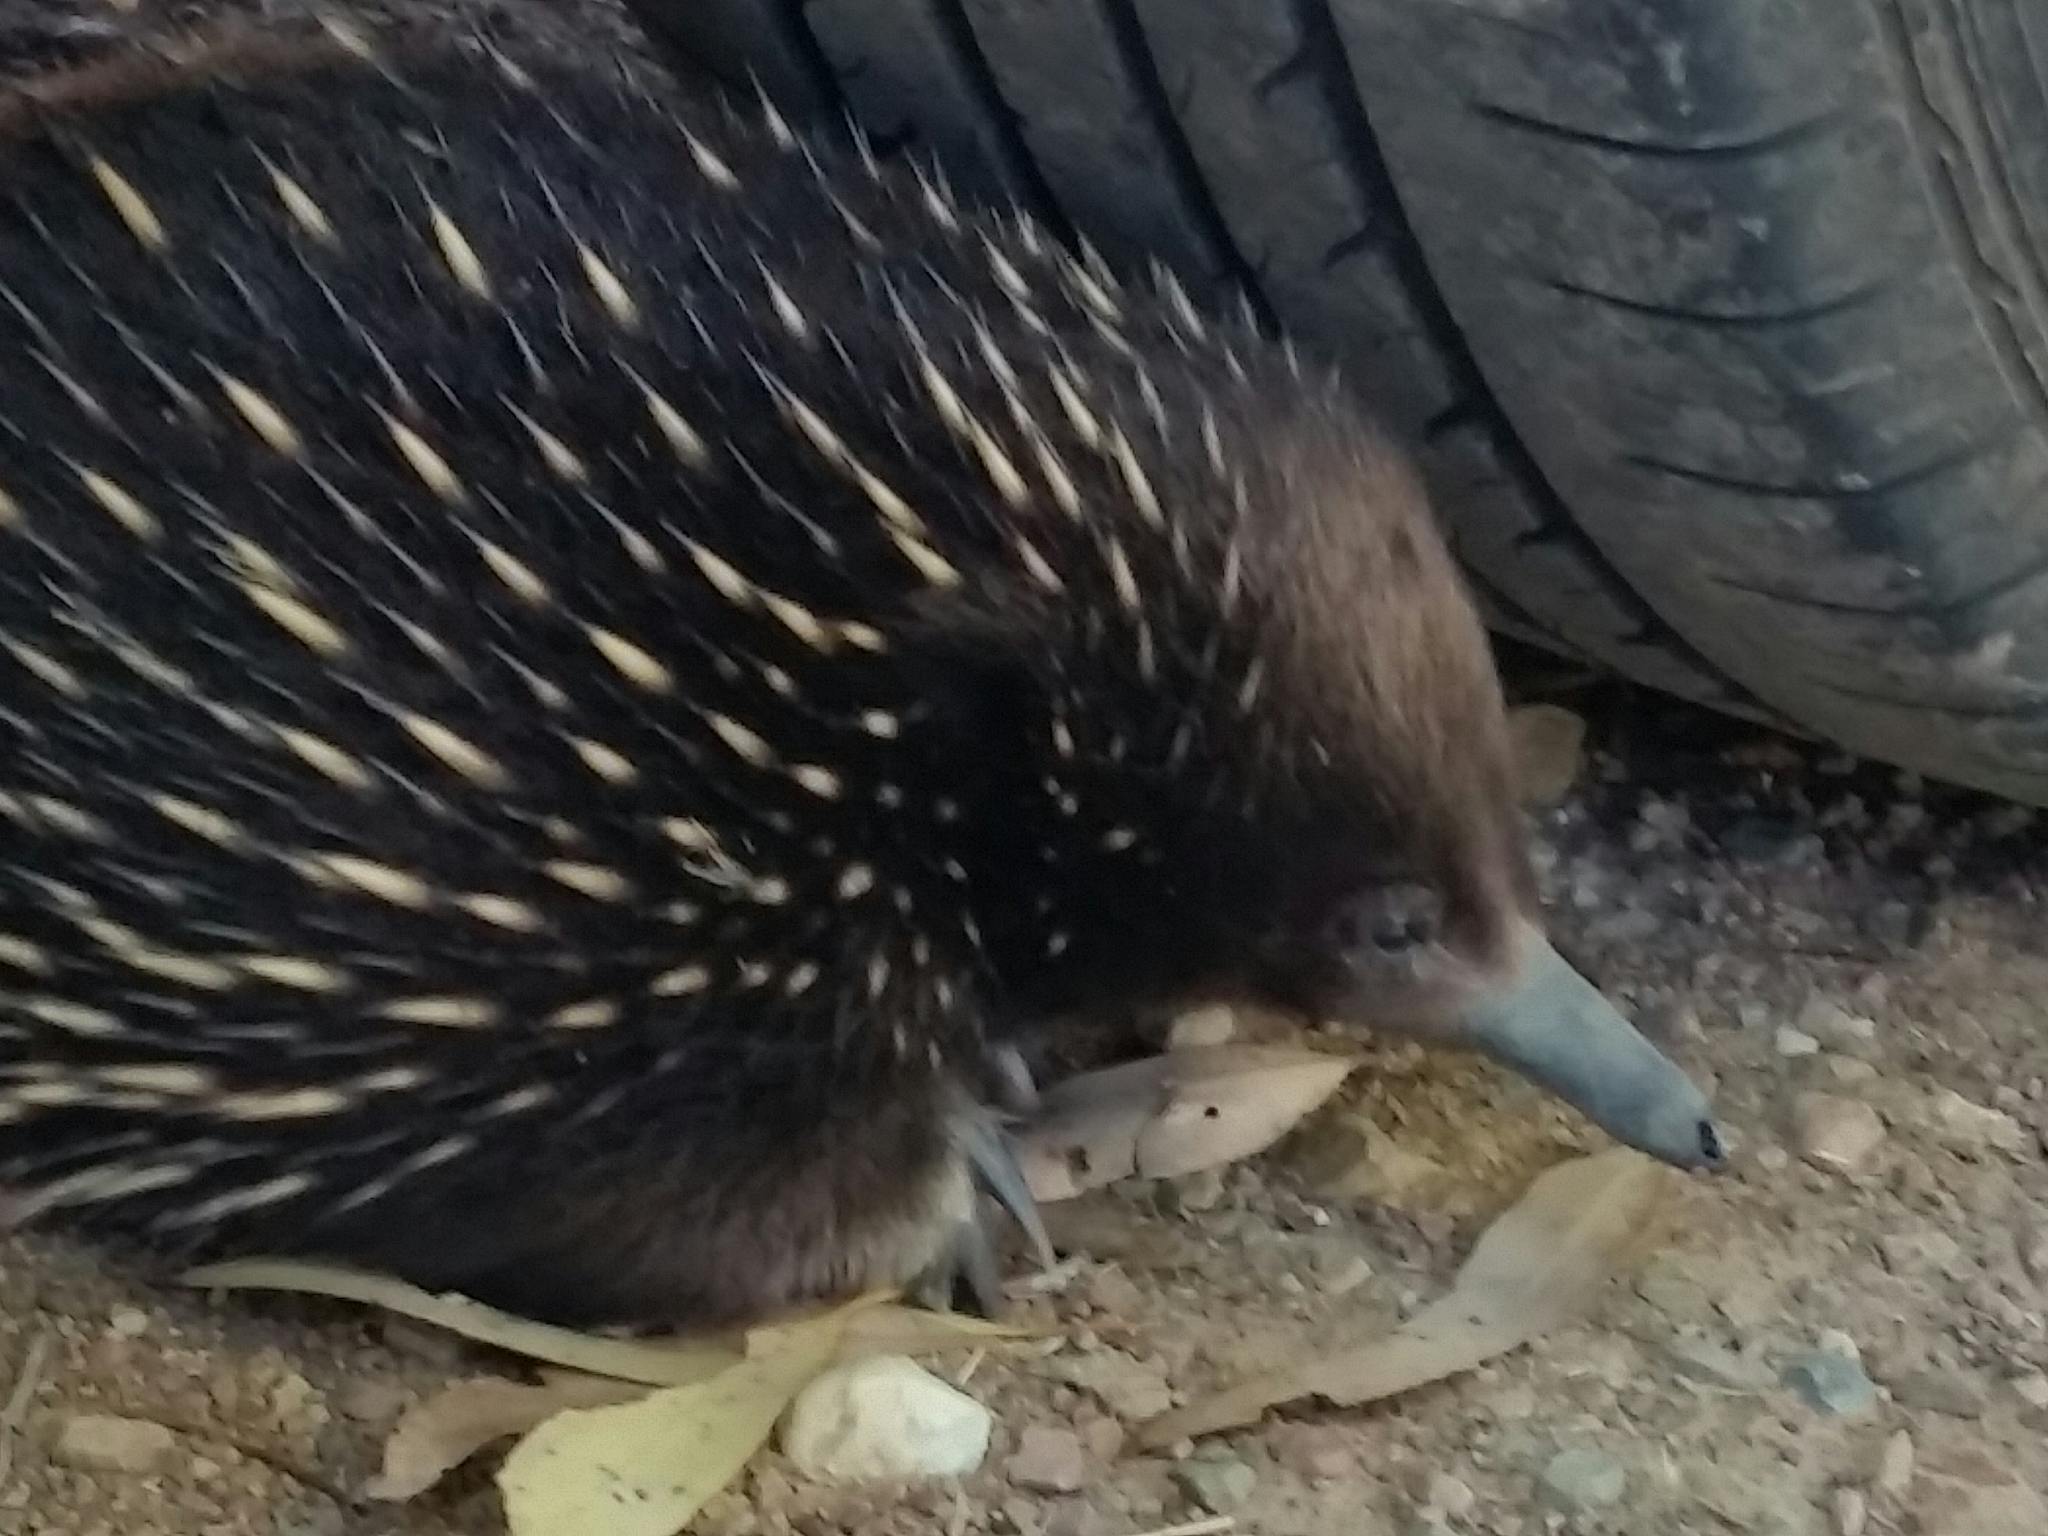 WIldlife such as echidnas  drop in for a chat from time to time.